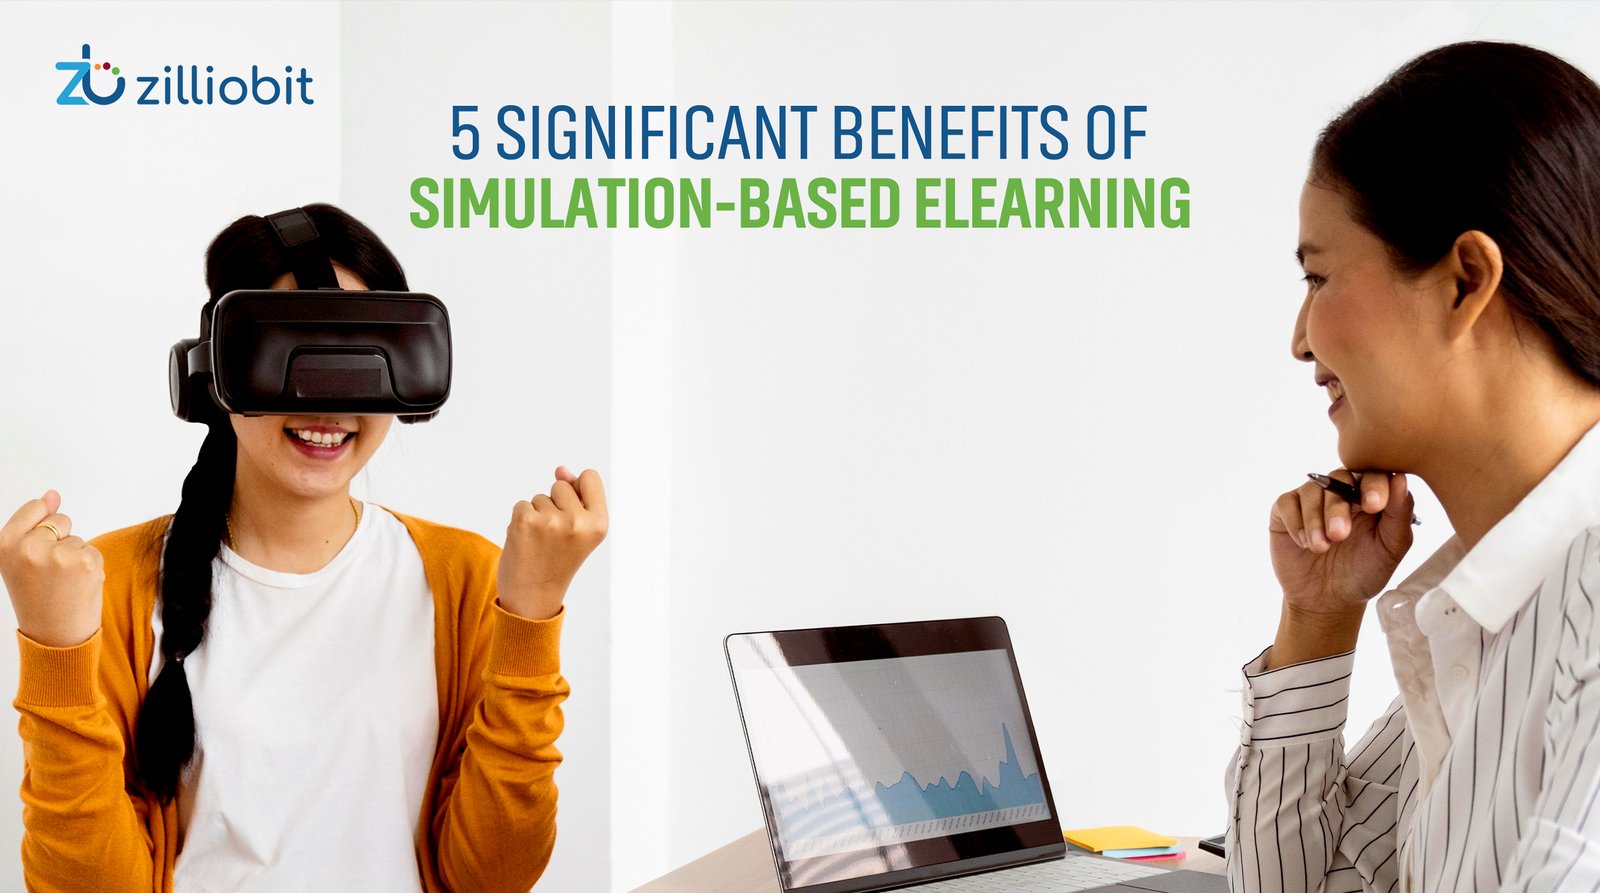 5 Significant Benefits of Simulation-Based eLearning